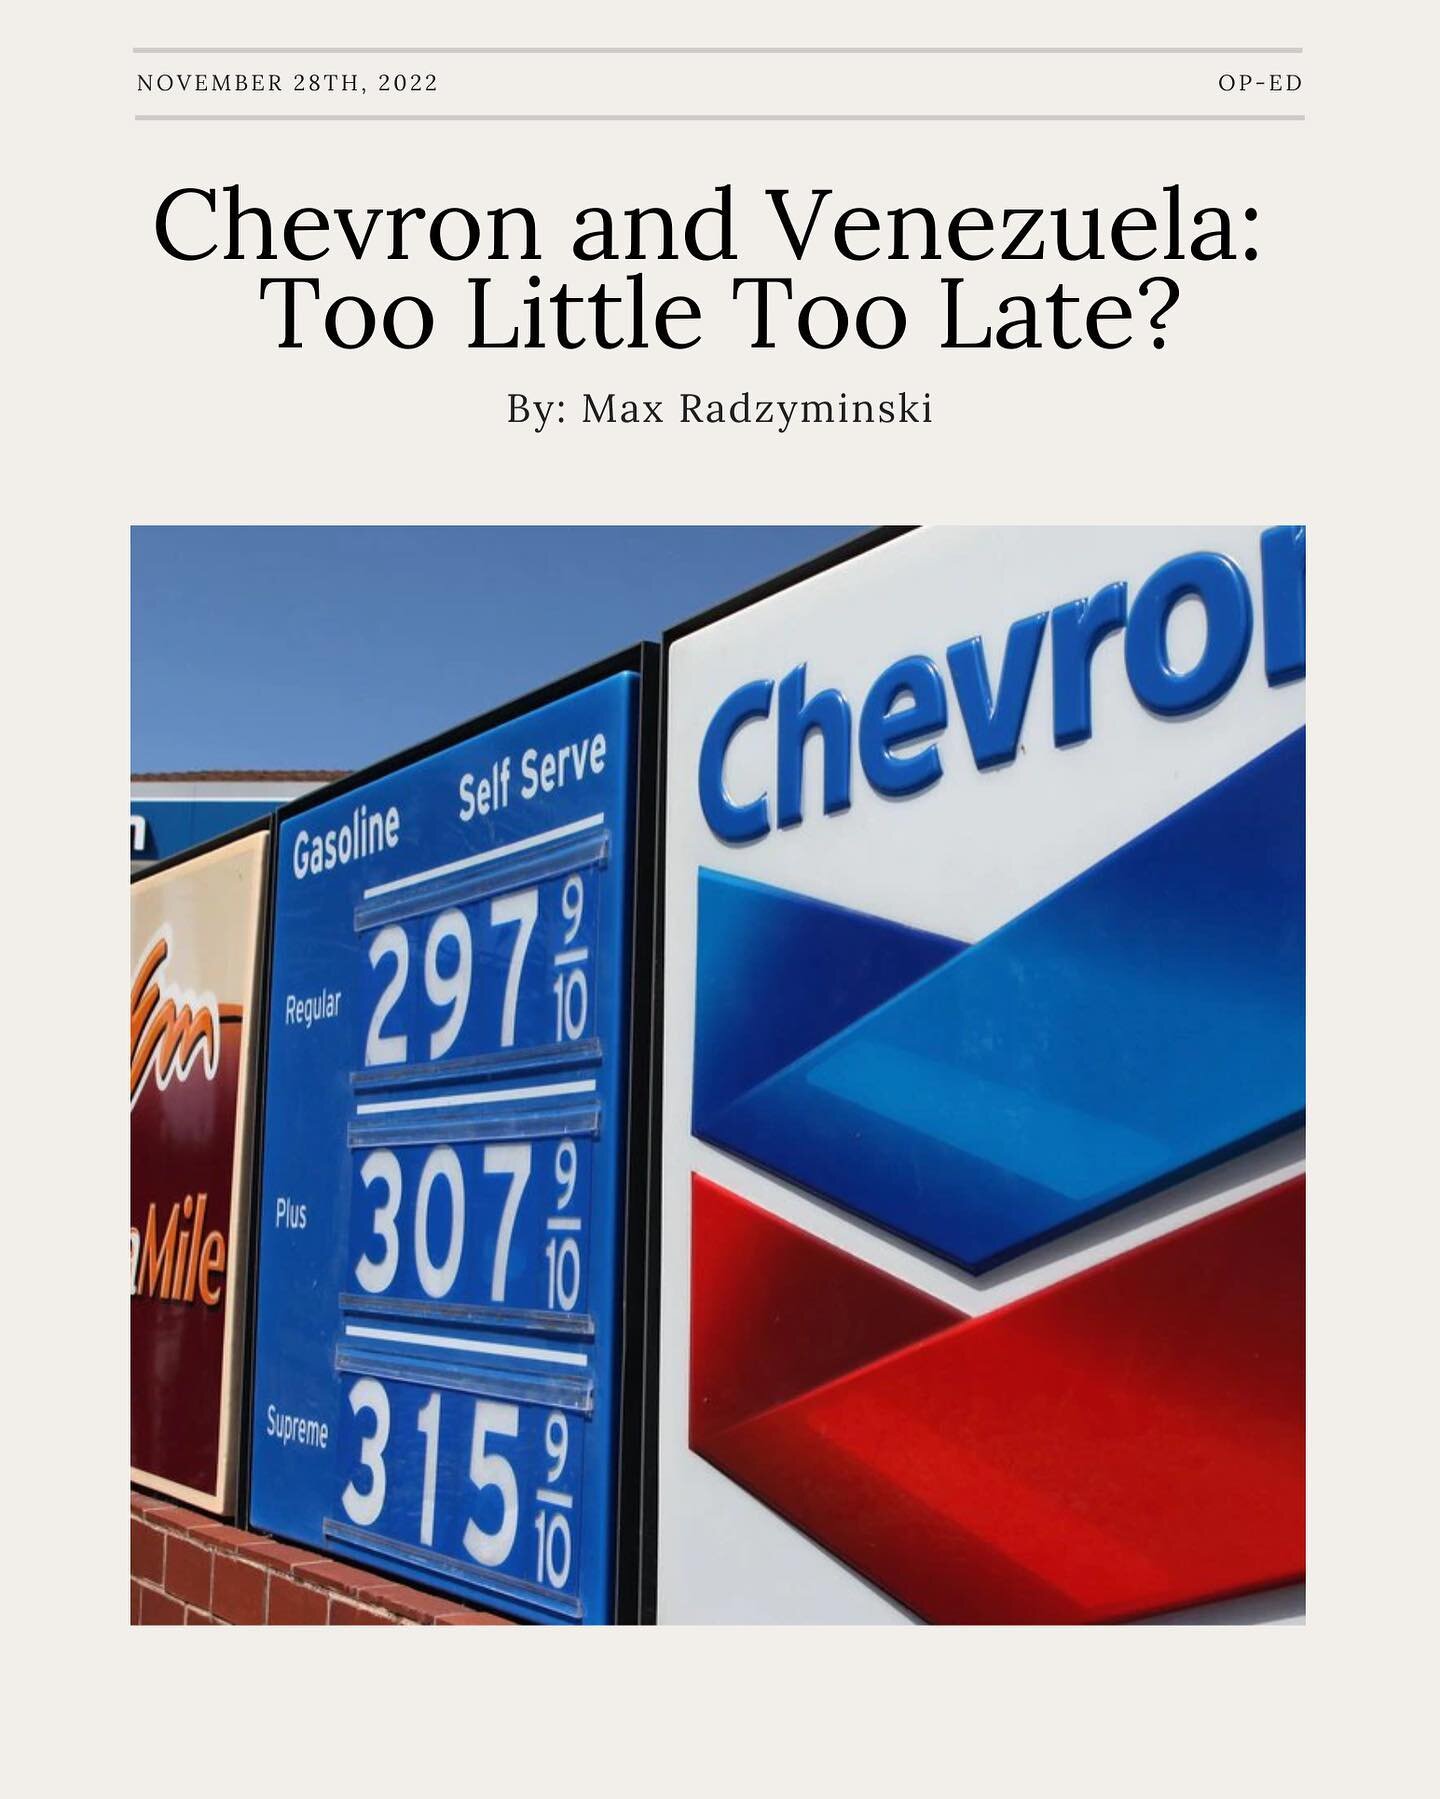 We&rsquo;re back with another Op-Ed about Chevron coming back to Venezuela, written by Max Radzyminski. Enjoy! 💙🤍